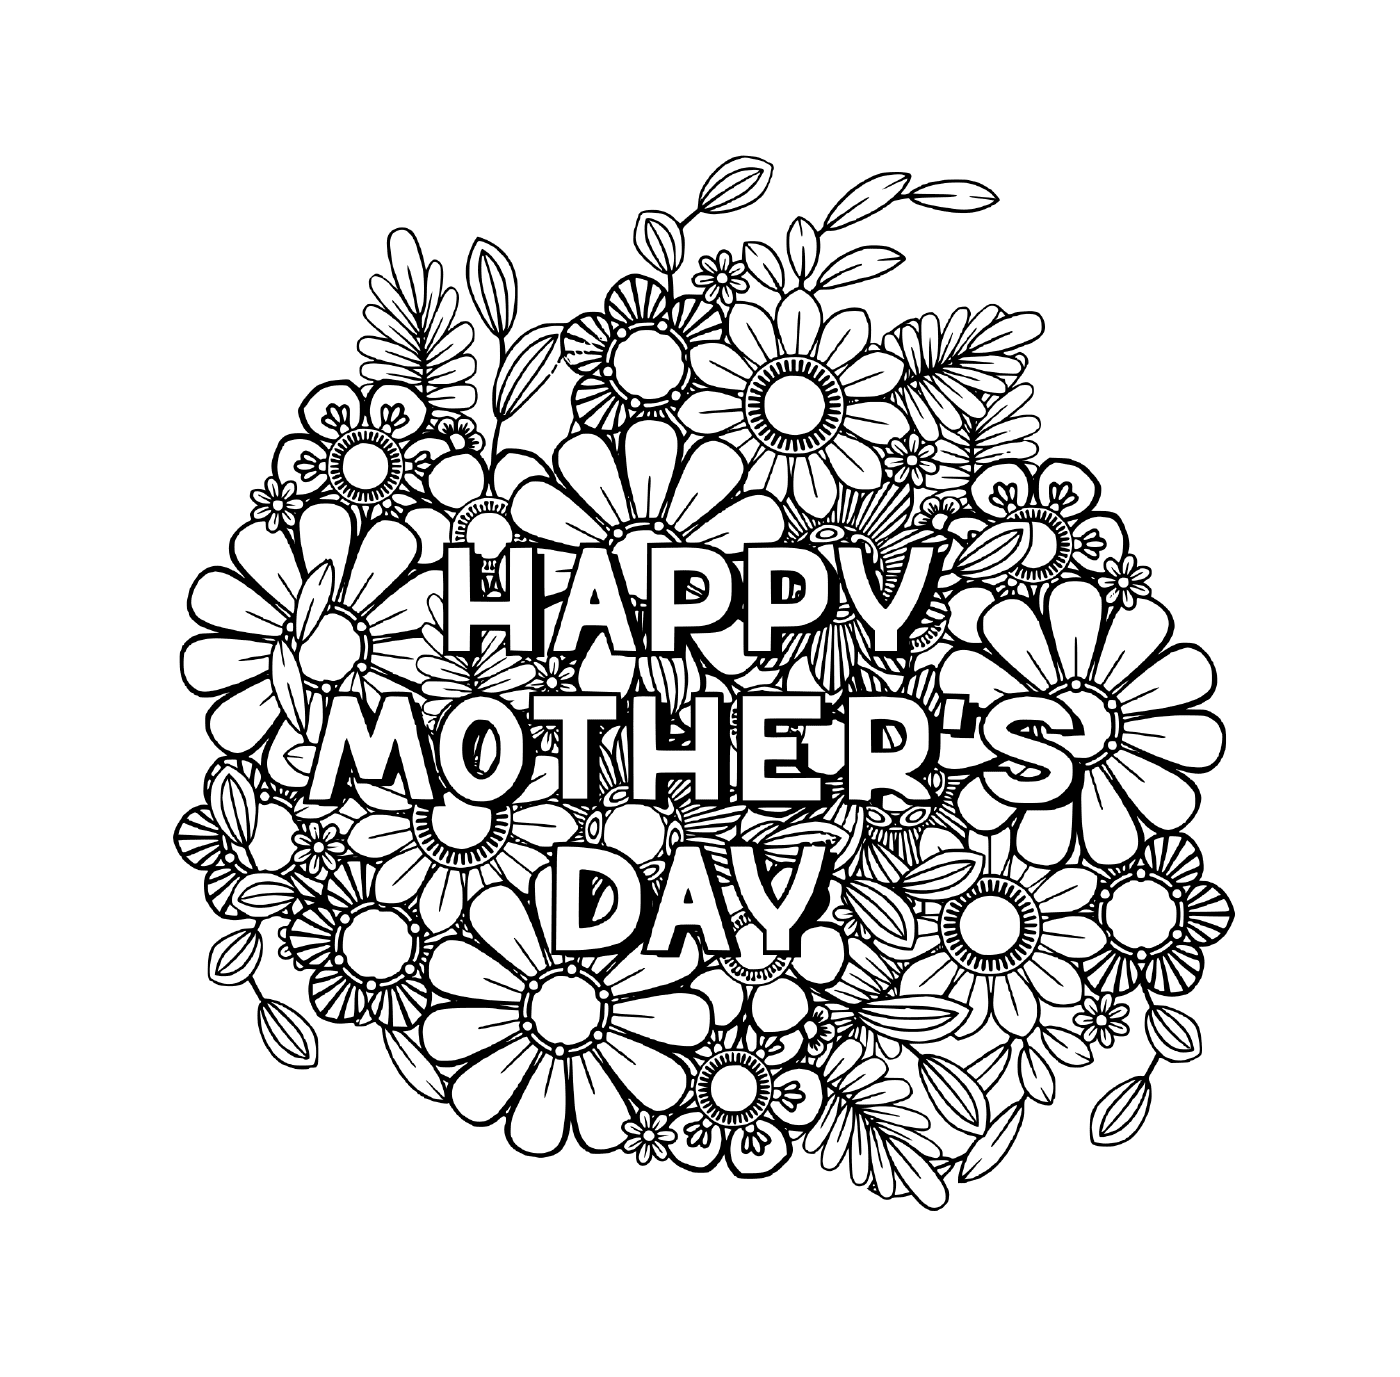  March 8, a happy Mother's Day card for an adult with flowers and roses 